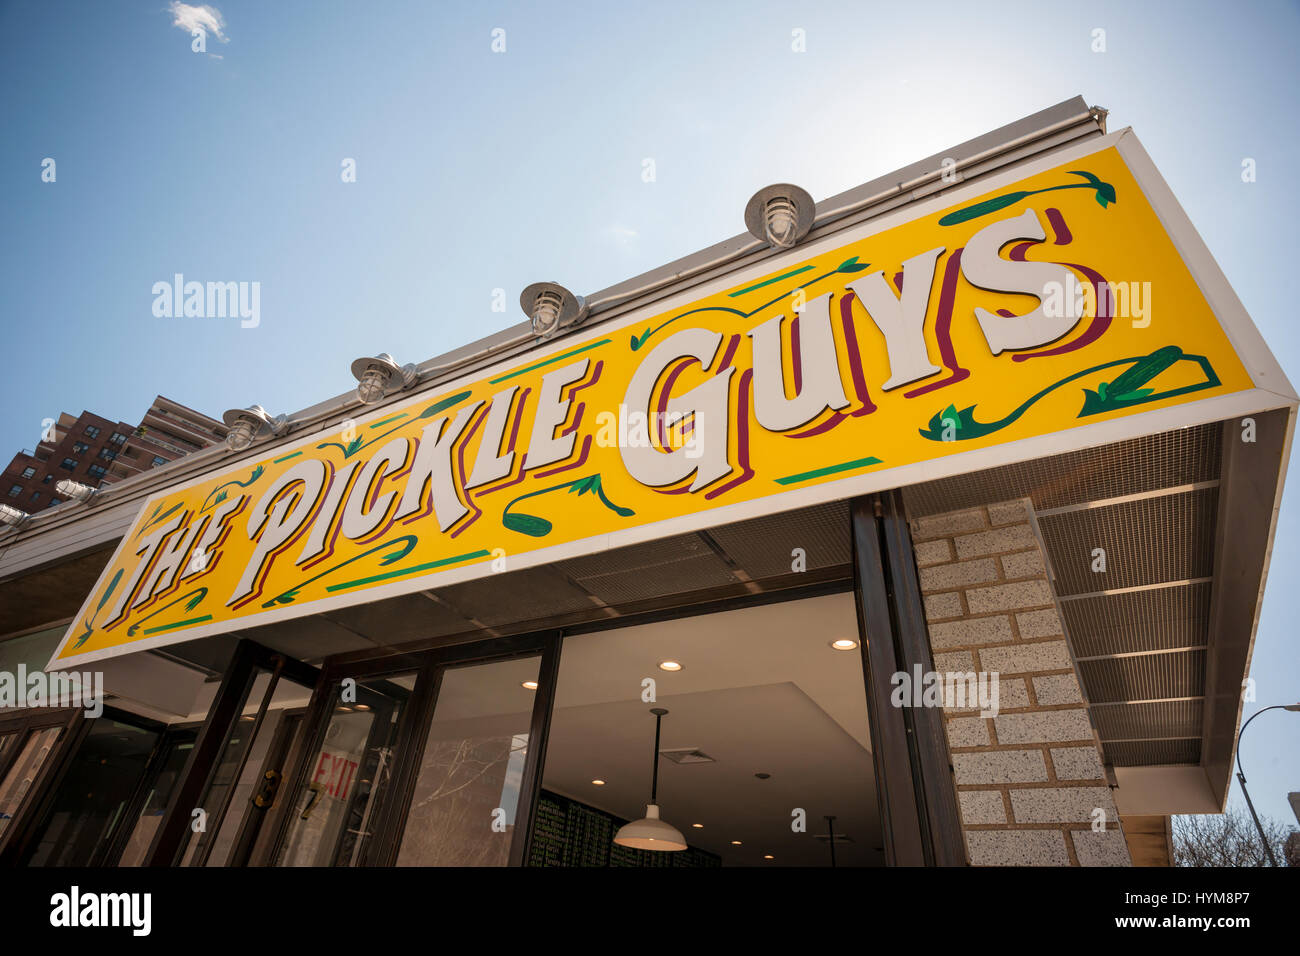 The Pickle Guys store in the Lower East Side of New York on Sunday, April  2, 2017. Everyone from millennials to former Lower East Sider's descend on  the store to buy the